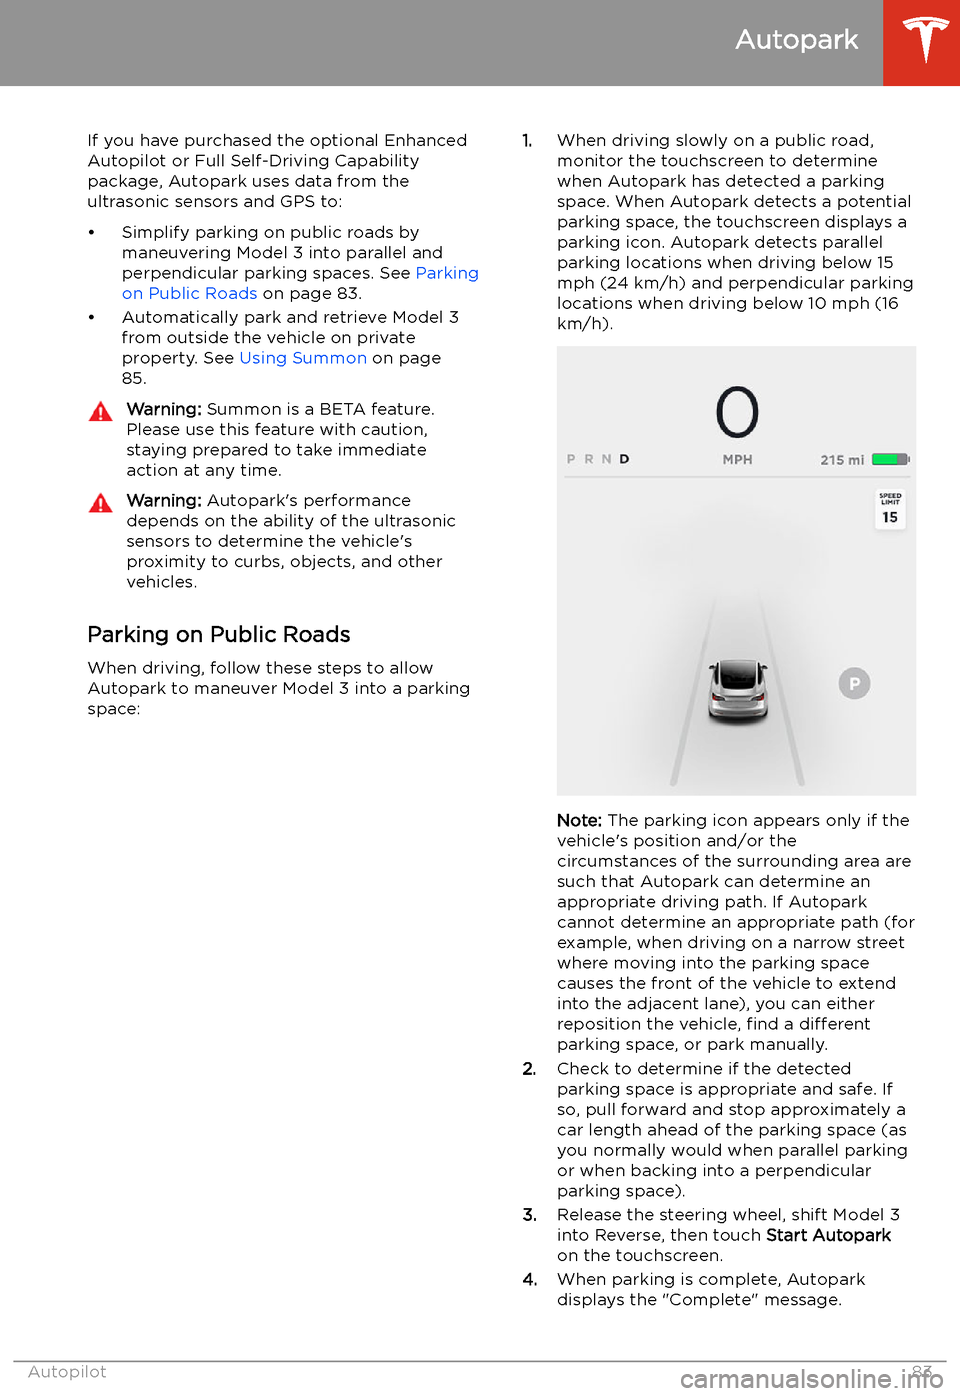 TESLA MODEL 3 2019  Owners Manual (Europe) Autopark
If you have purchased the optional Enhanced Autopilot or Full Self-Driving Capabilitypackage, Autopark uses data from theultrasonic sensors and GPS to:
